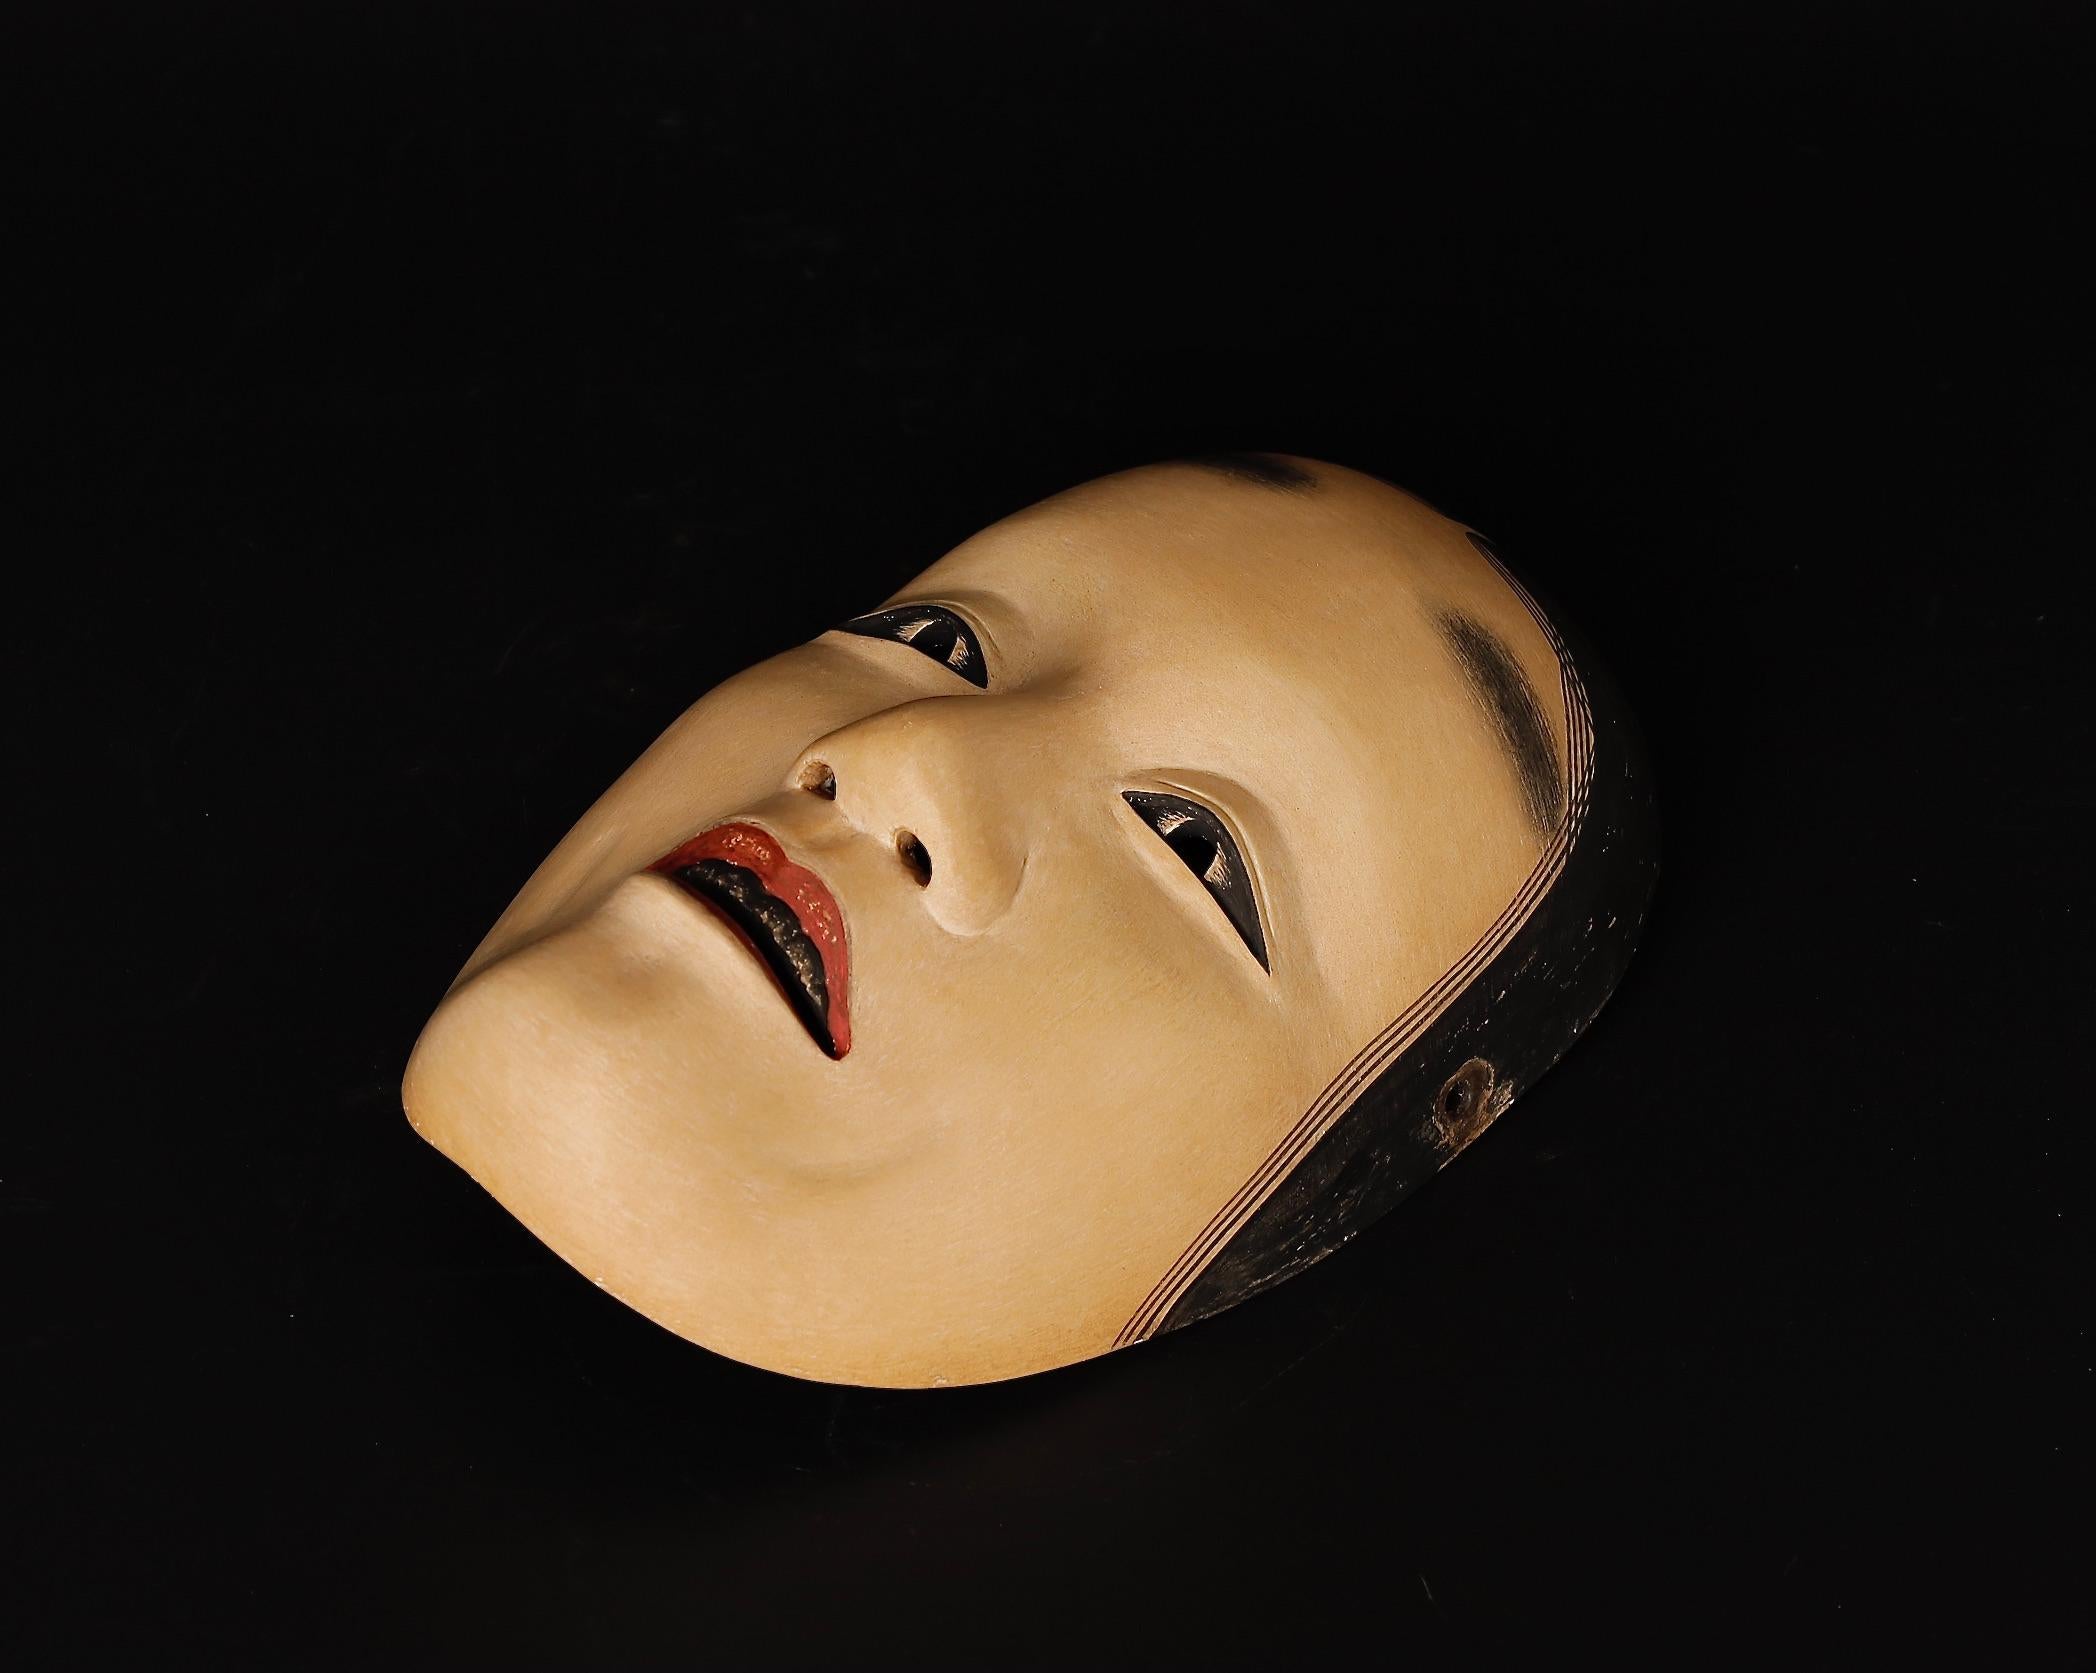 Authentic Japanese Fukai Noh Mask Depicting Heartbreak of a Middle-Aged Woman For Sale 1